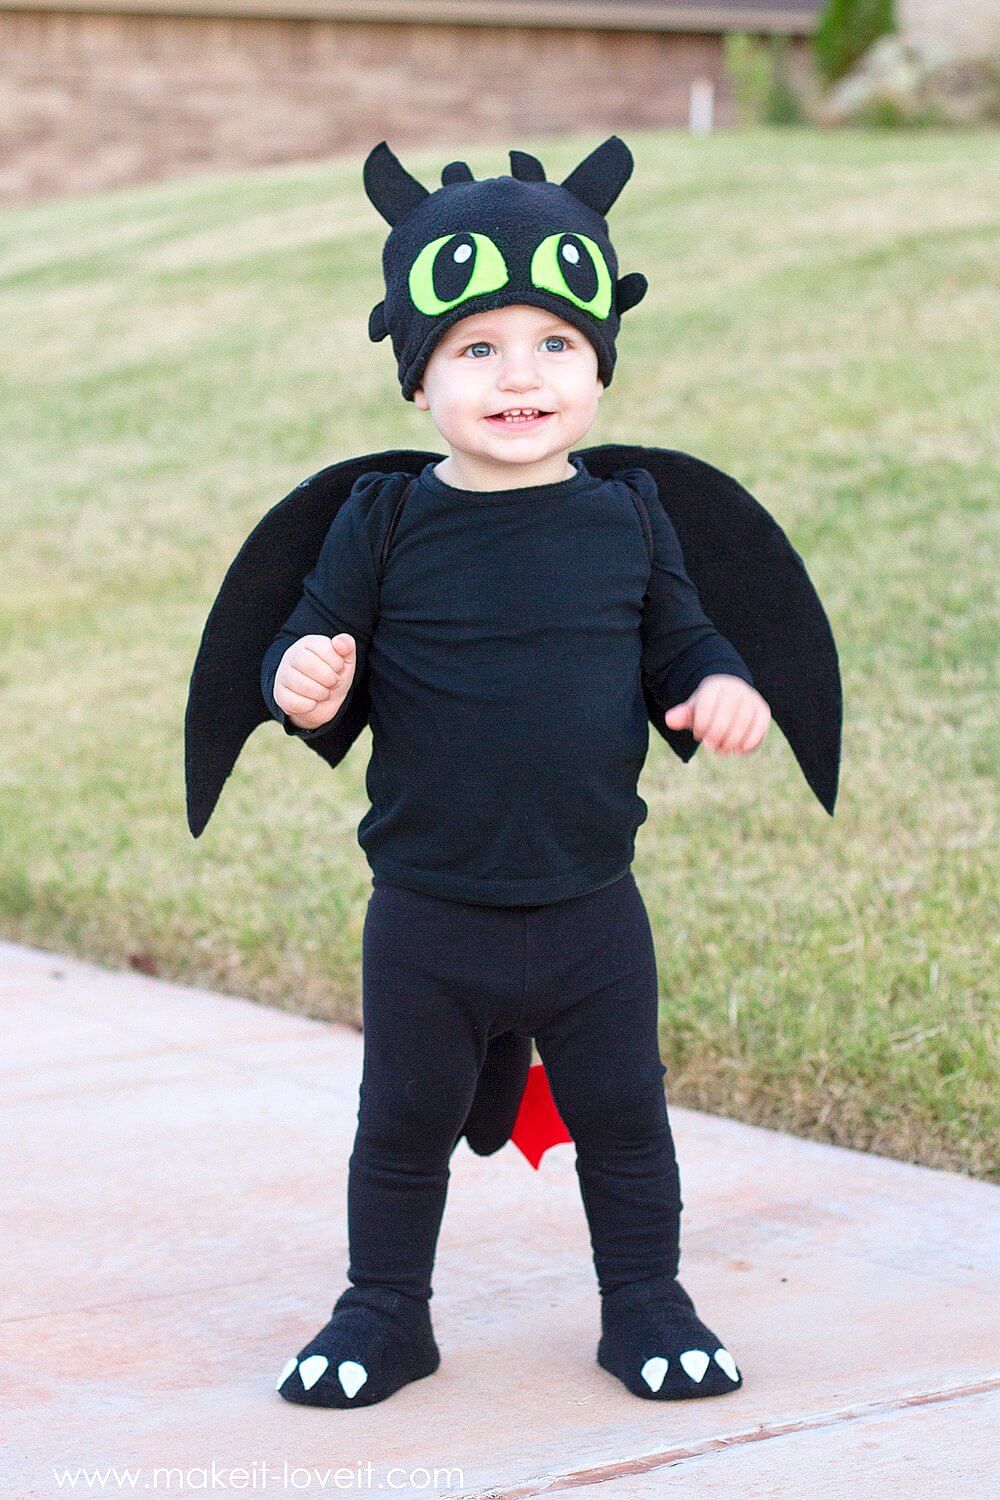 DIY Toothless Dragon-Themed Costume For Toddlers